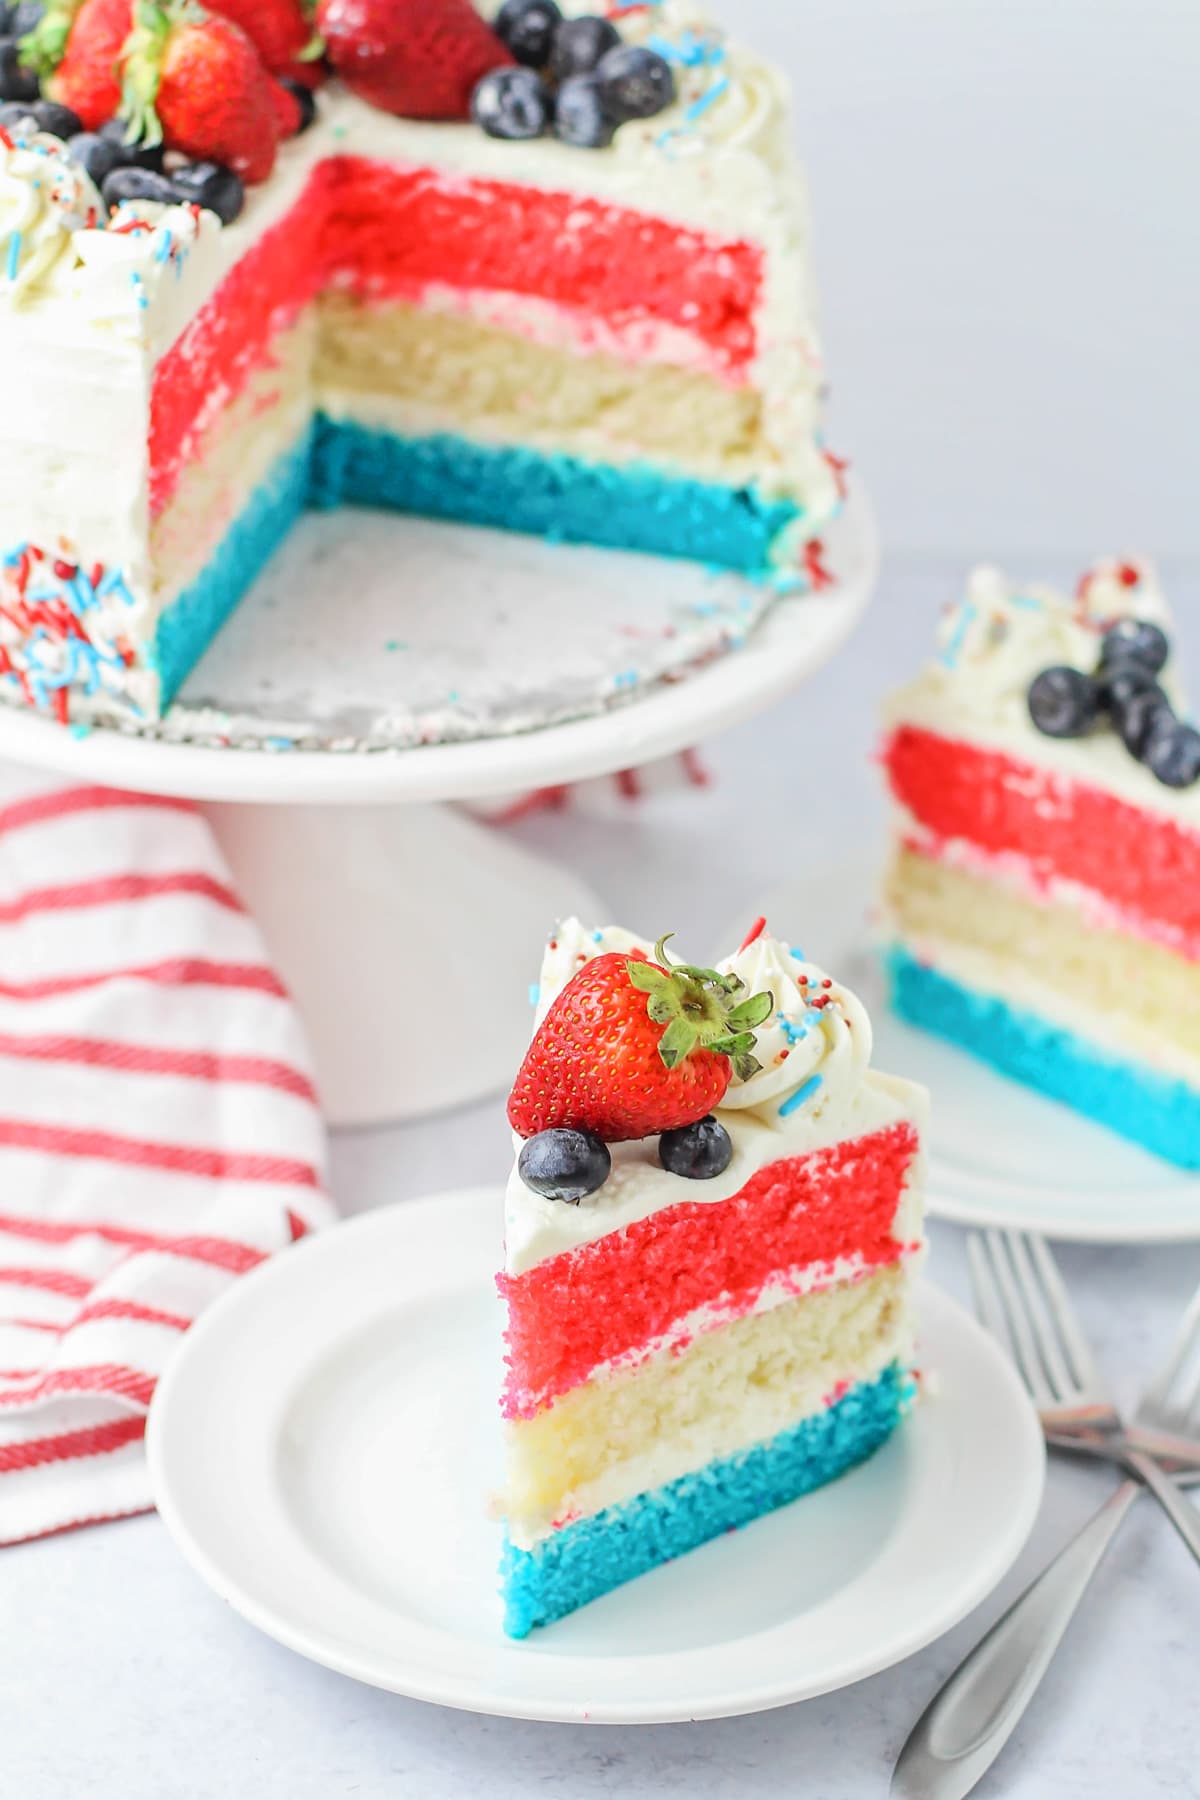 A slice of layered red white and blue cake topped with fresh berries.